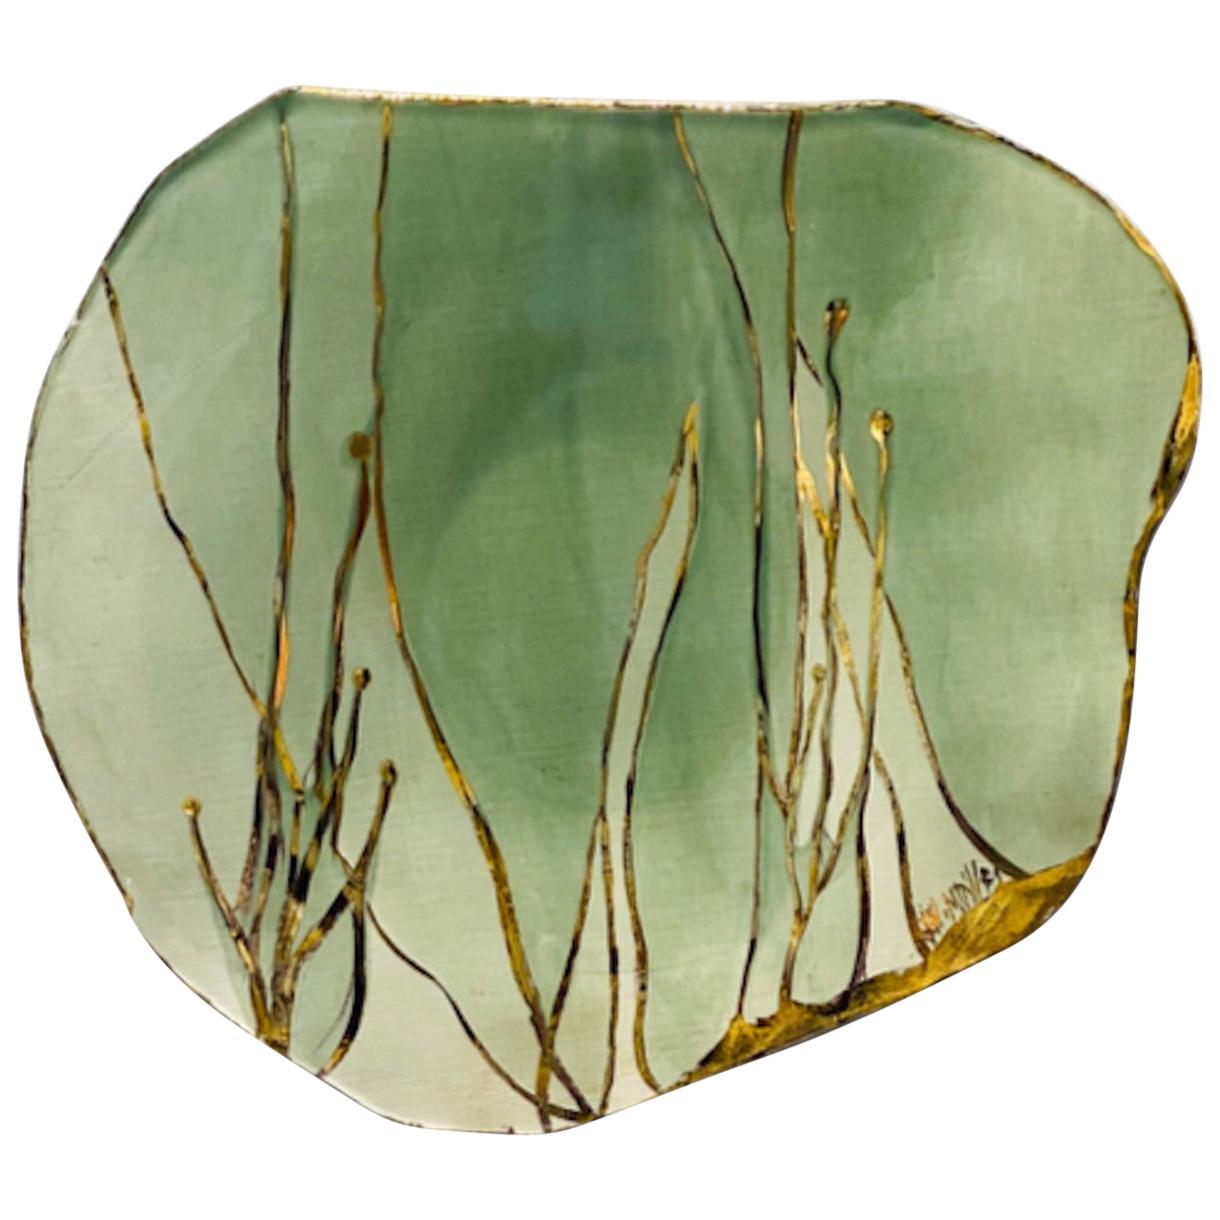 Jaap Wieman Seabed Handmade Ceramic Plate in Celadon and Gold